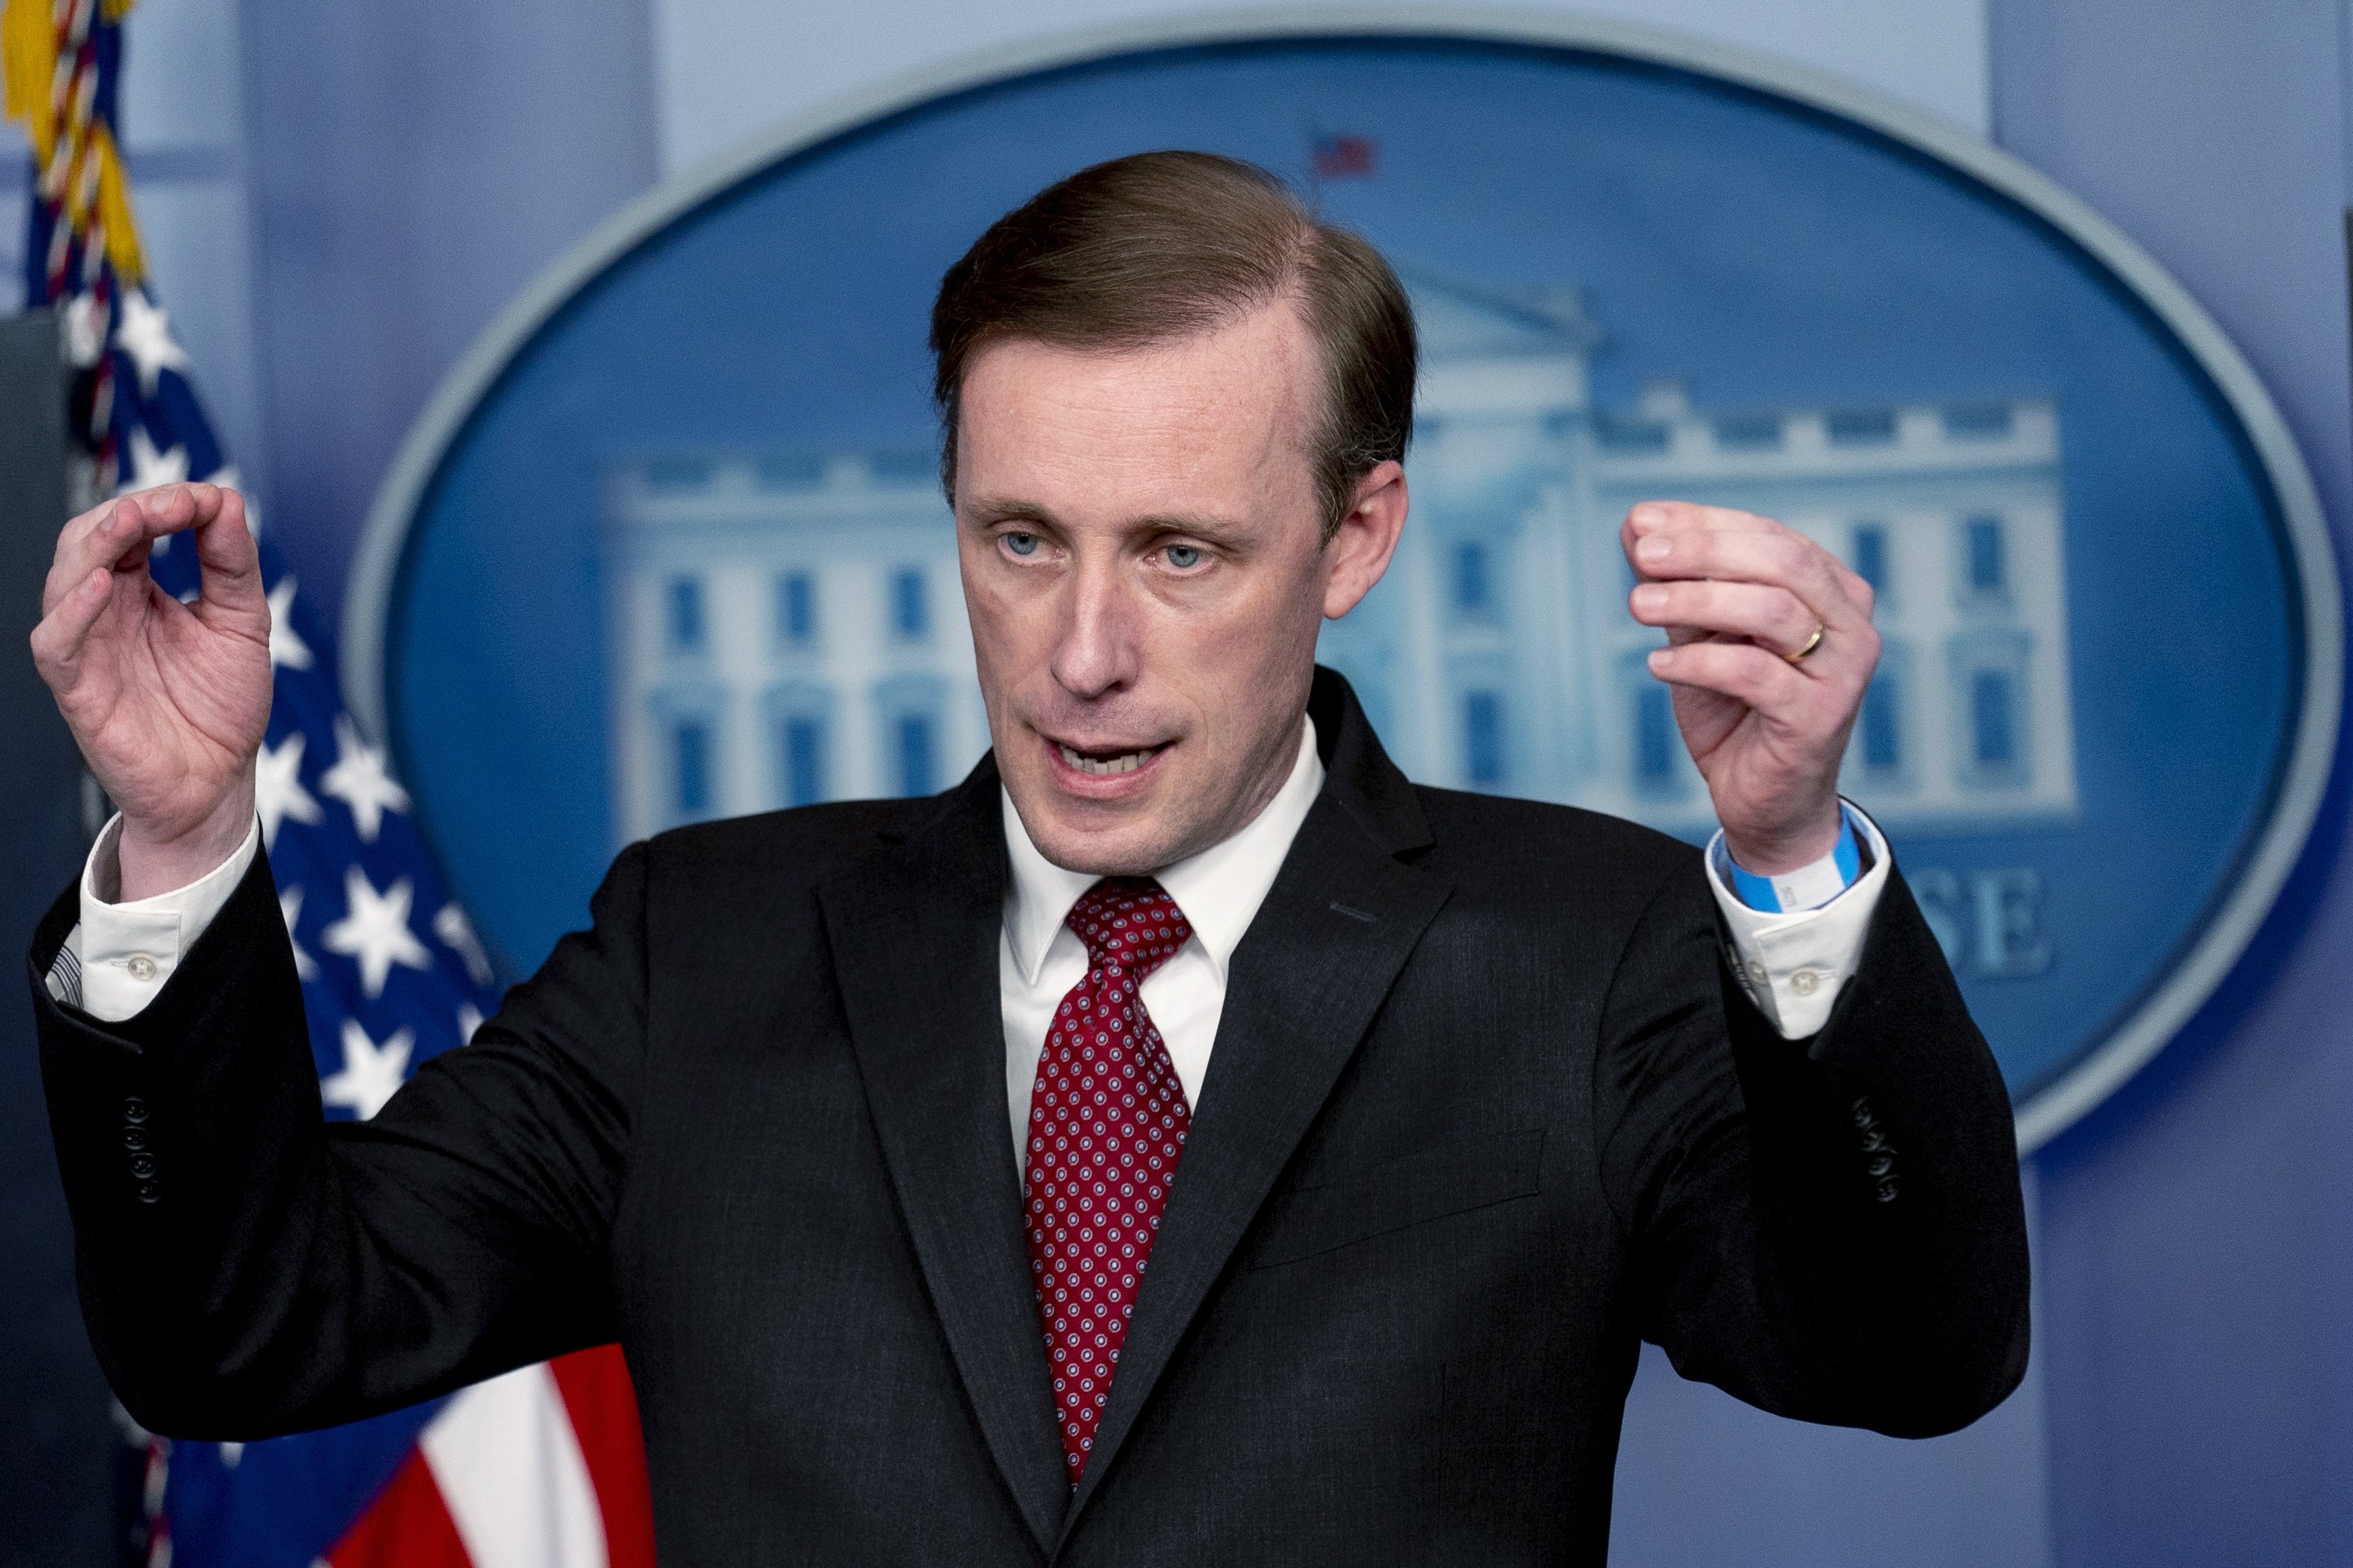 White House national security adviser Jake Sullivan gives an update about the ongoing talks with Russia at a press briefing at the White House in Washington, D.C., U.S., Jan. 13, 2022. (AP Photo)